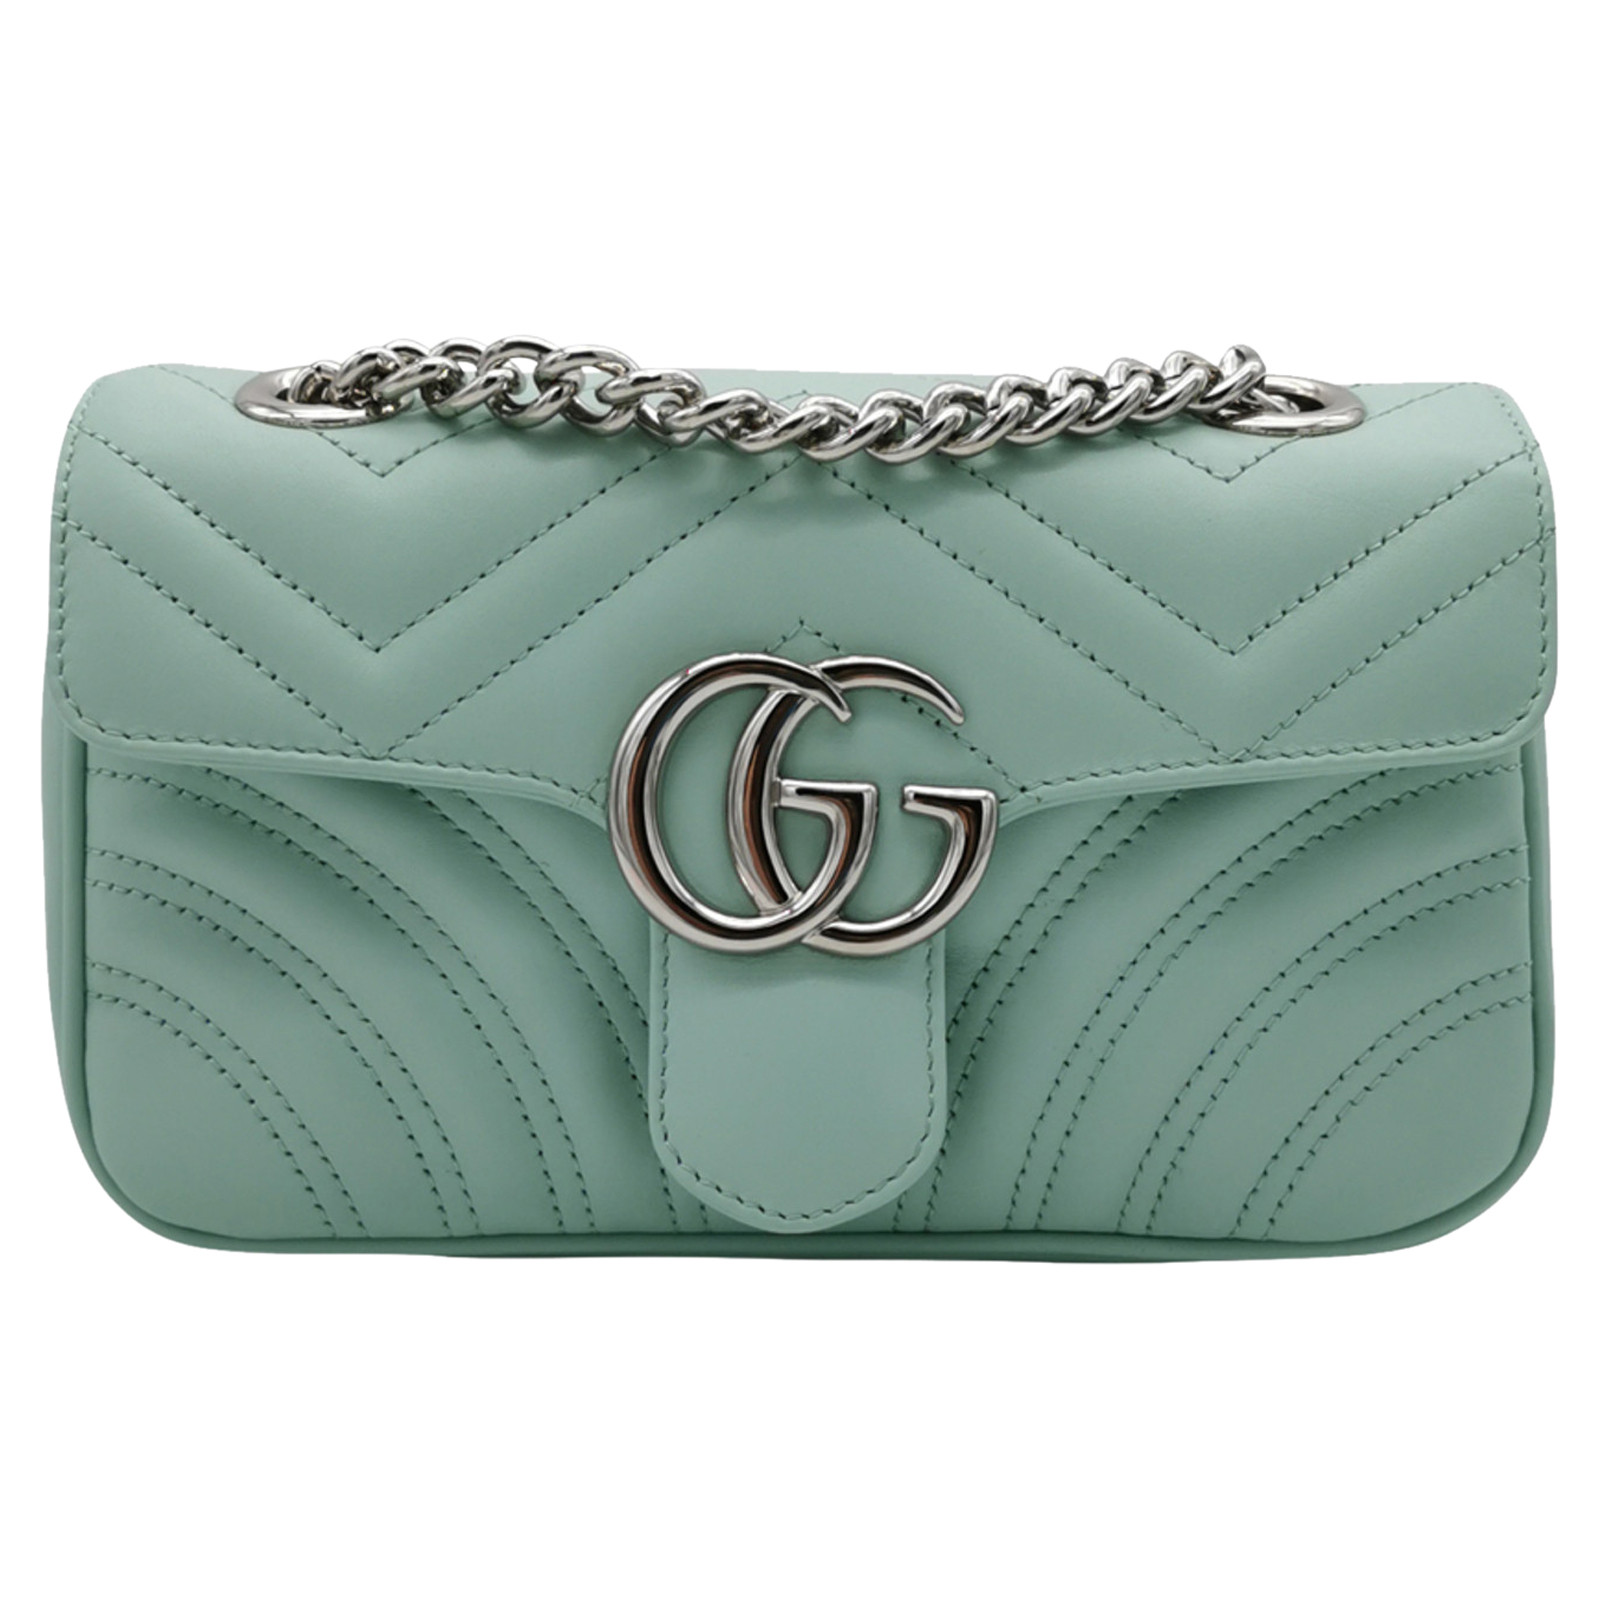 Gucci Marmont Mini Bag Leather in Turquoise